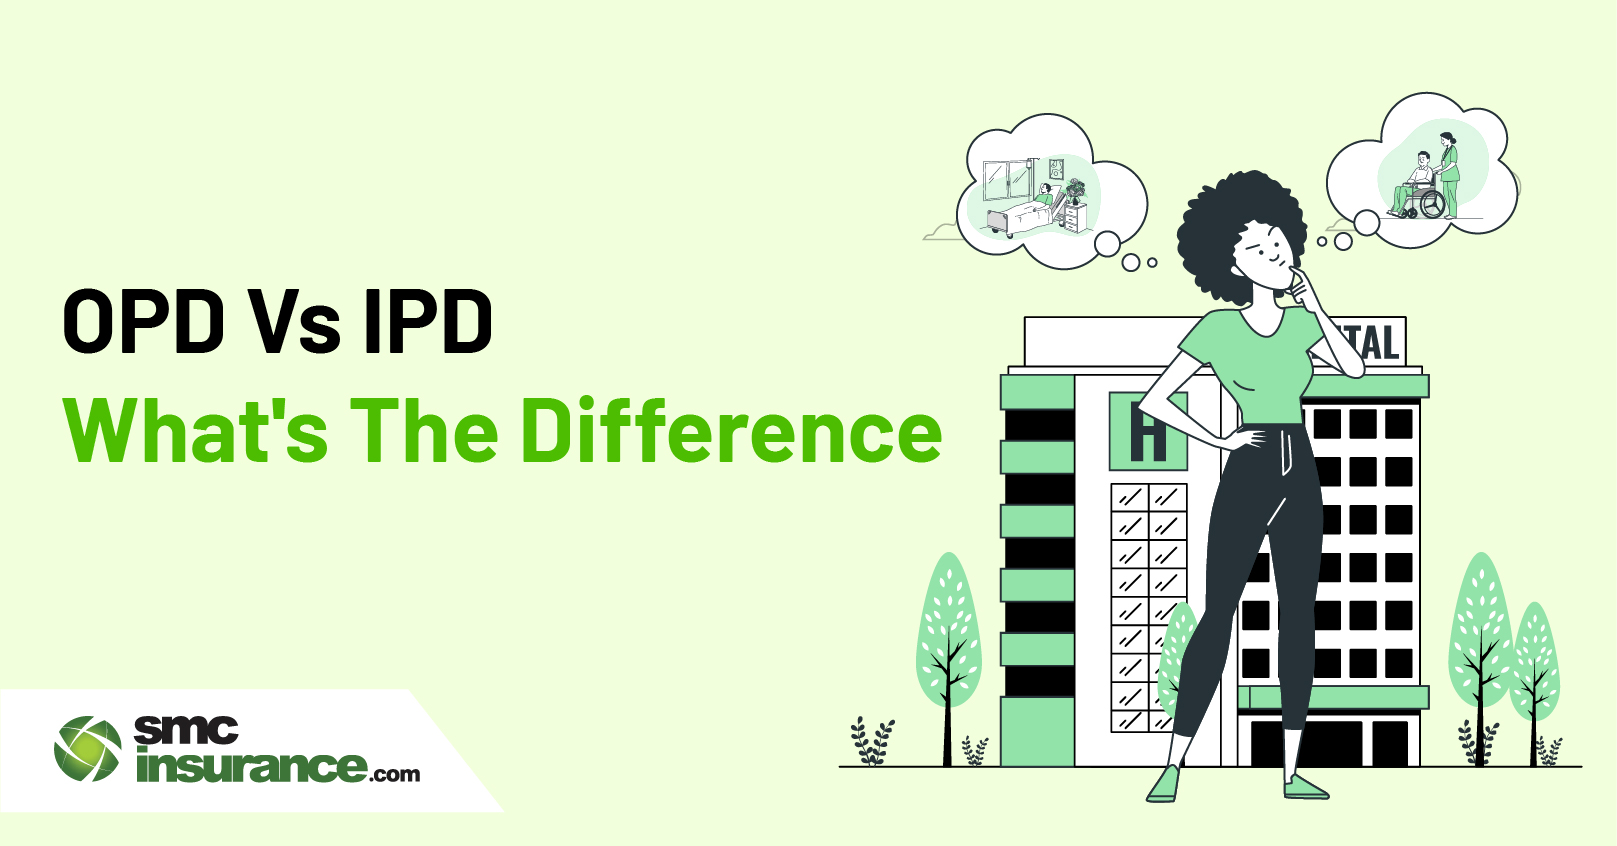 OPD Vs IPD - What’s The Difference?